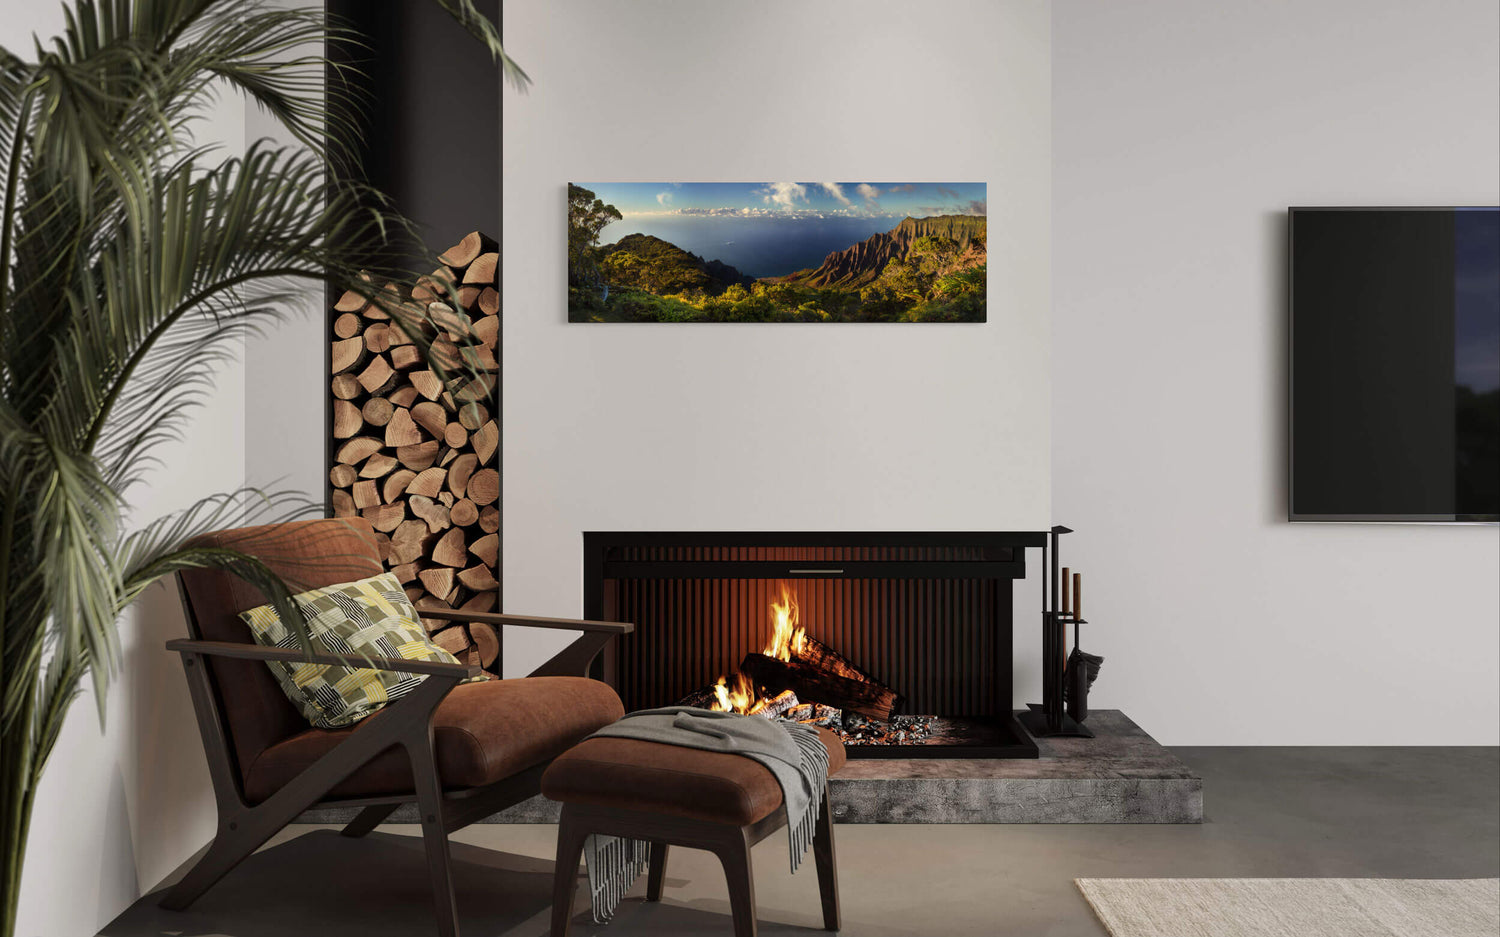 A piece of Kauai art showing the view from the Kalalau Overlook in Hawaii hangs in a living room.